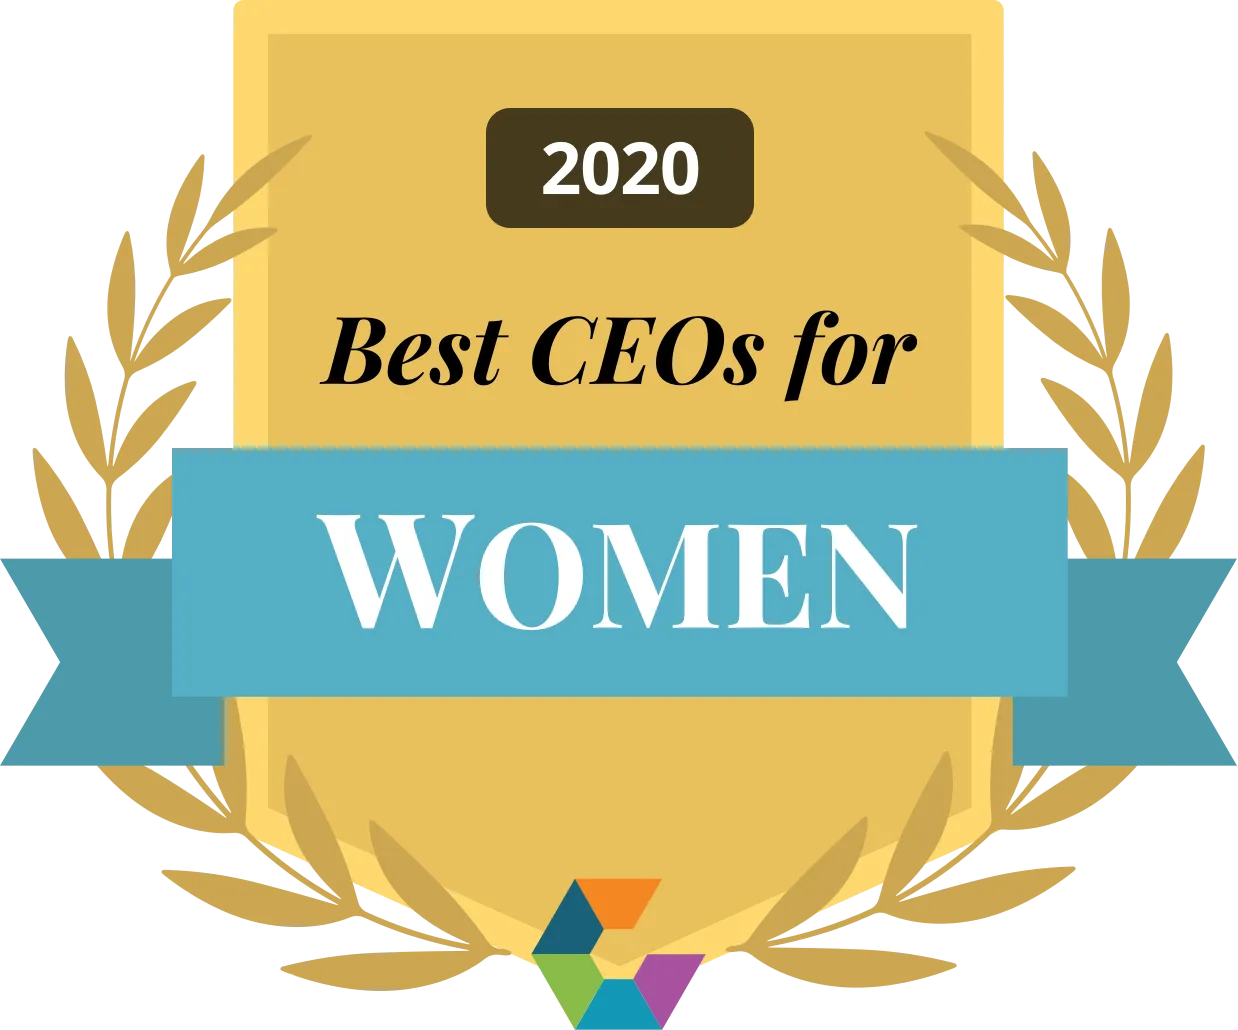 Comparably - Best CEO for Women 2020